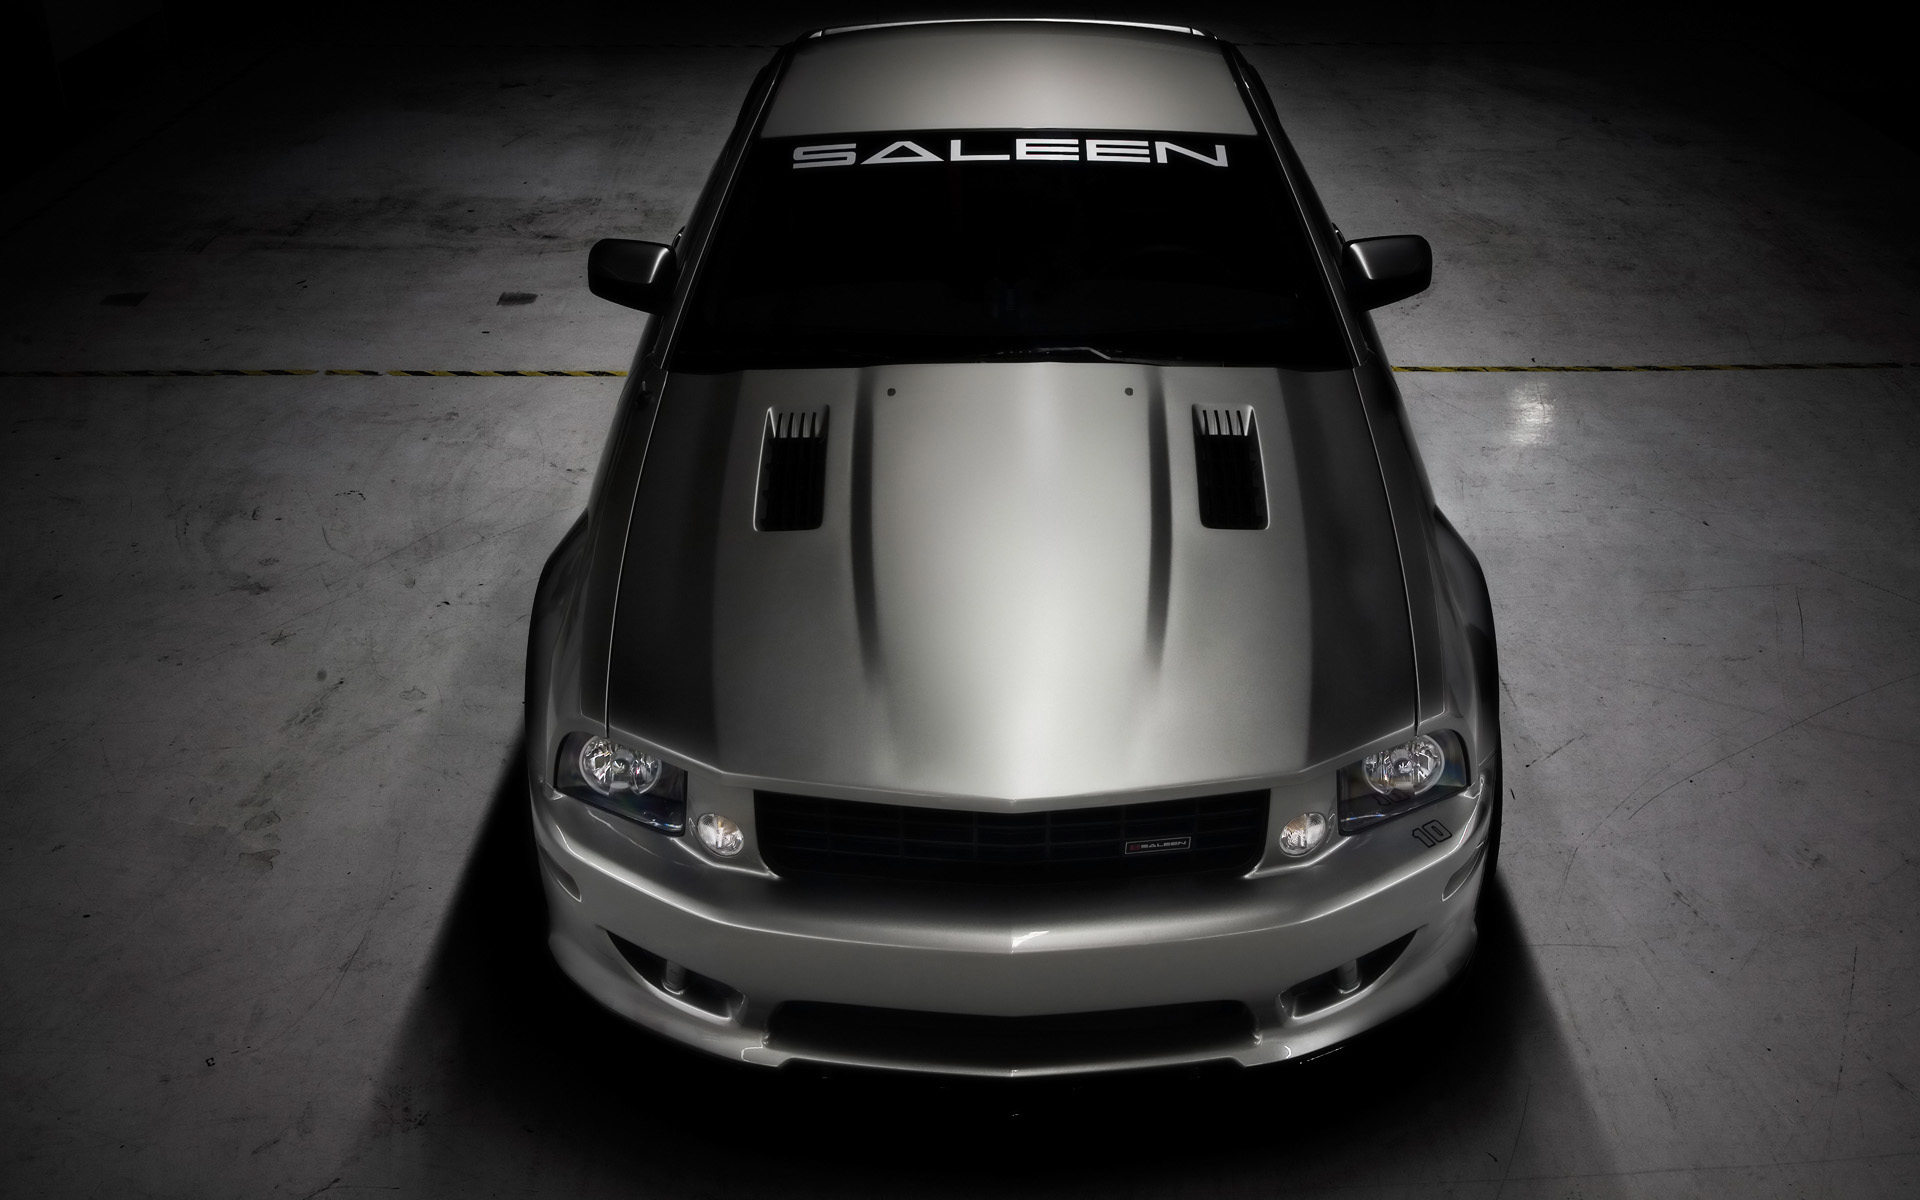 2008, Saleen, S3, 02extreme, Ford, Mustang Wallpaper